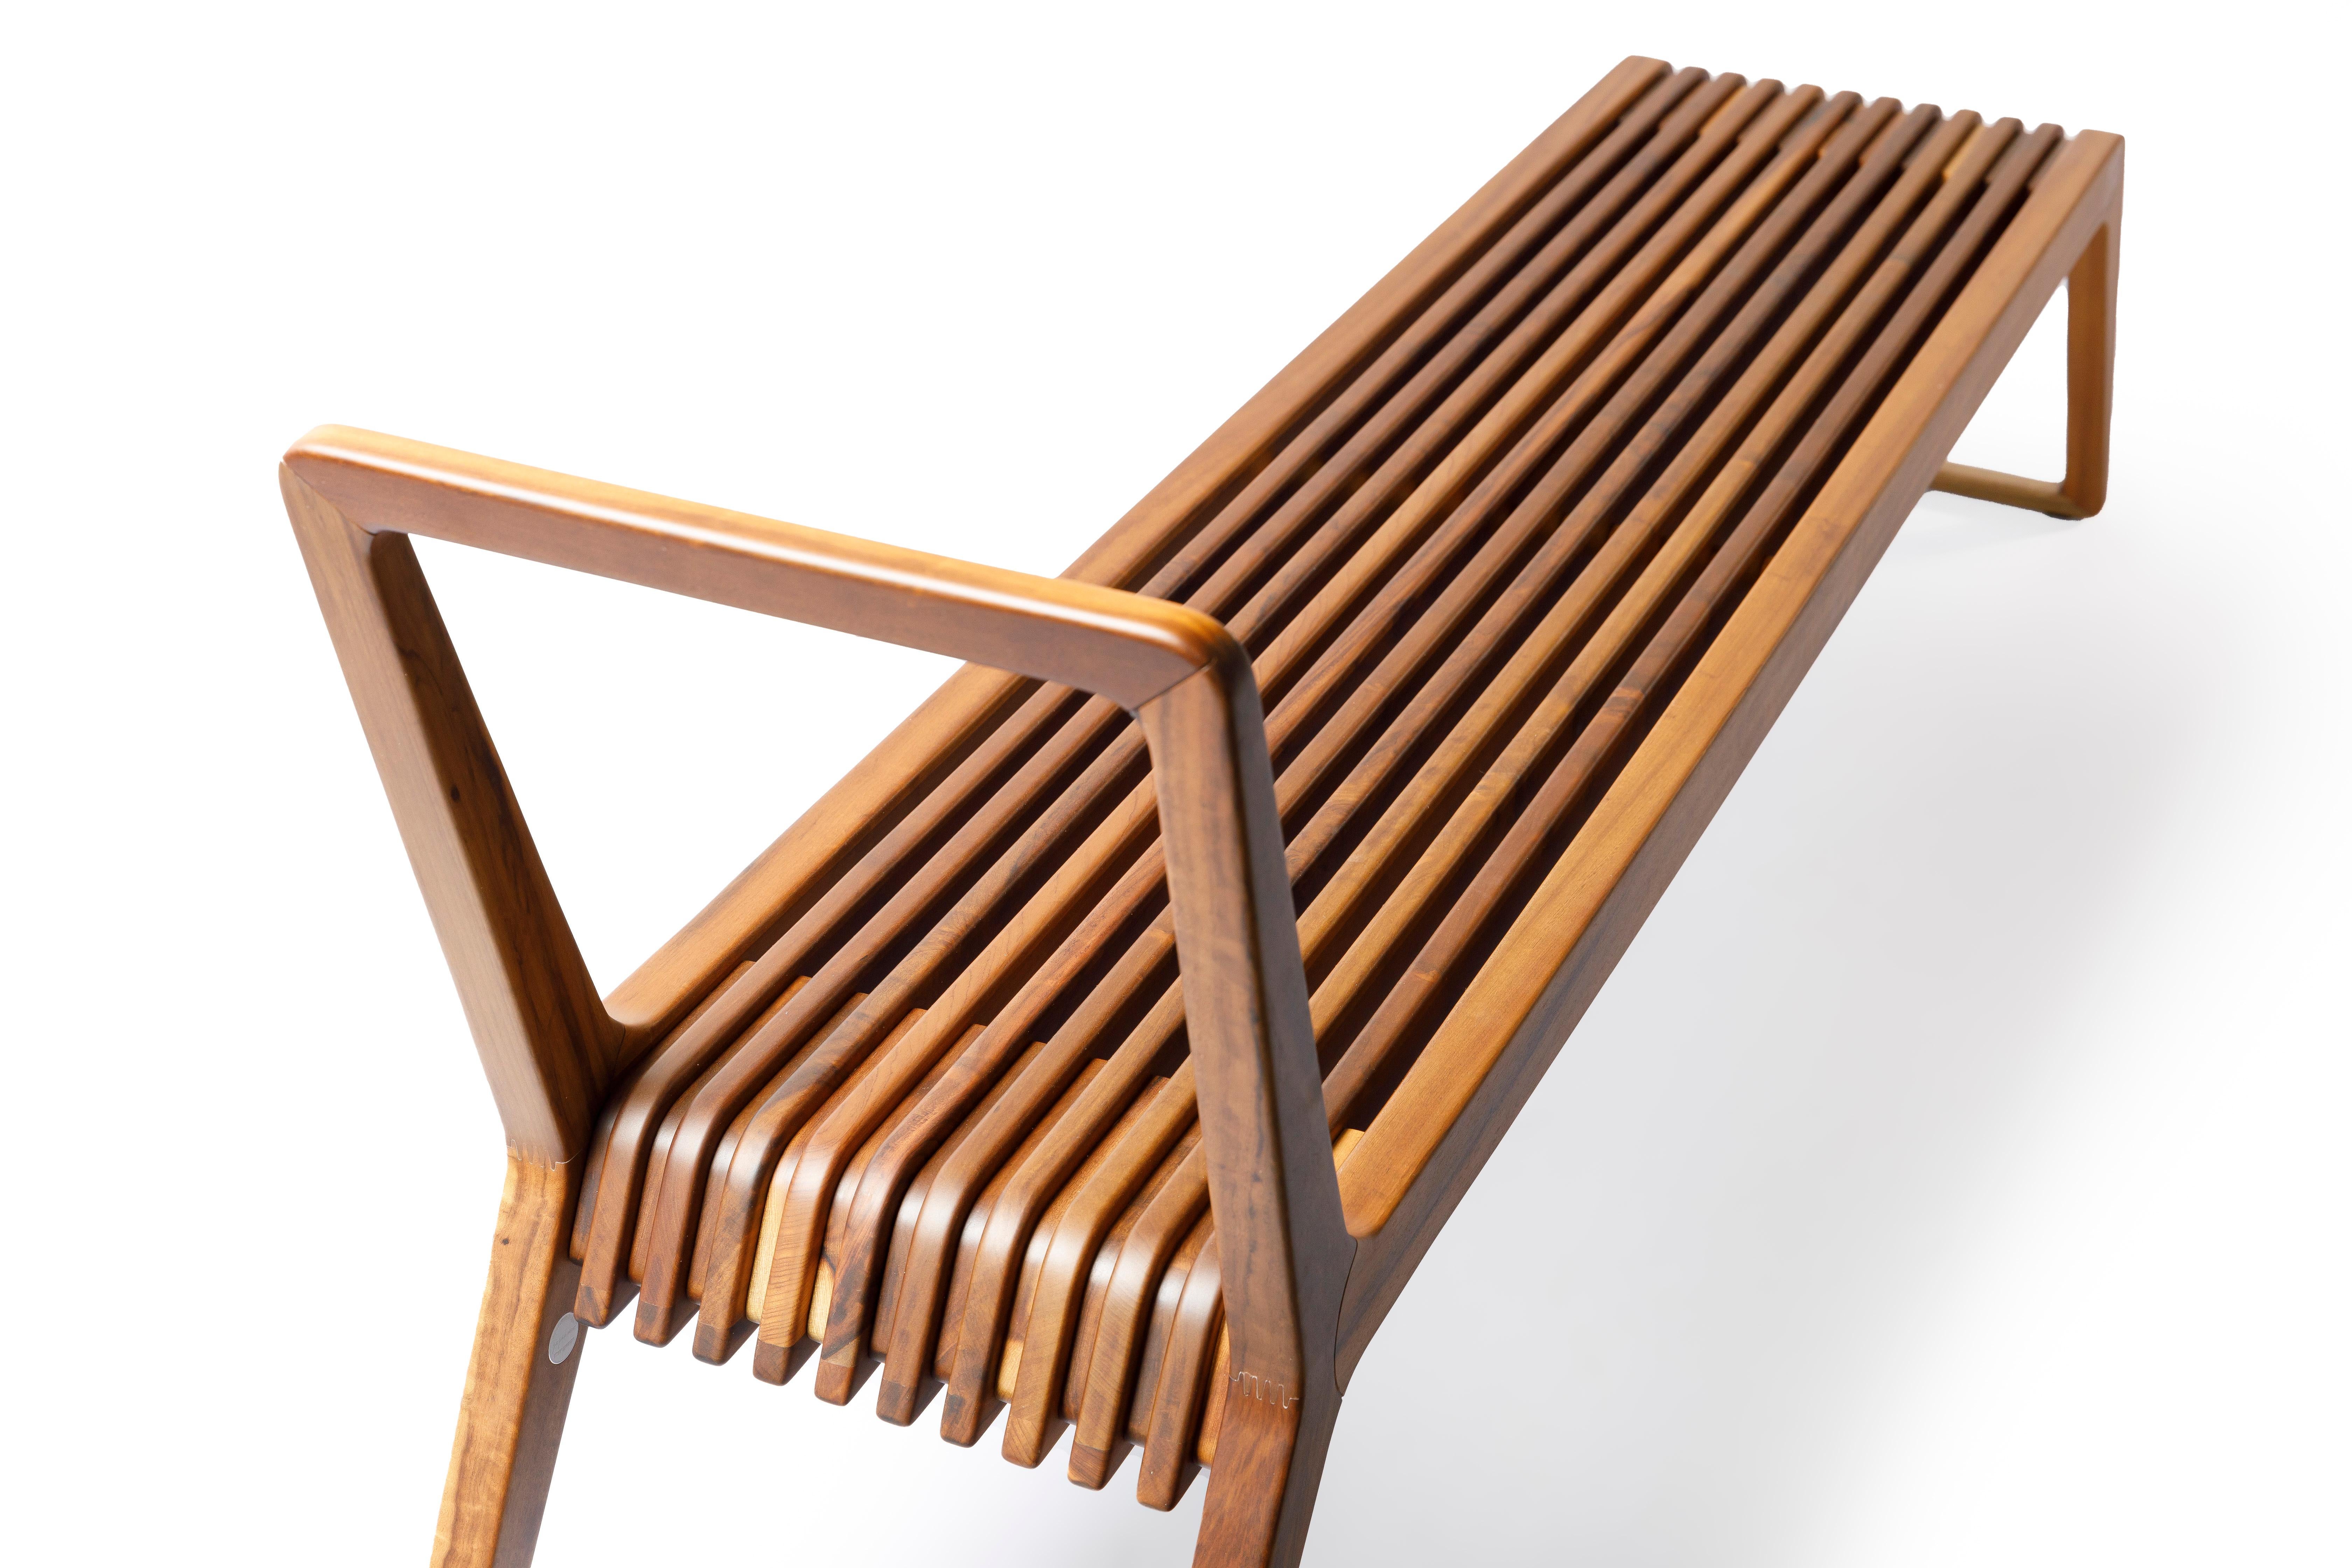 The Buzios Bench is a unique and elegant piece of furniture designed by Brazilian industrial designer Guto Indio da Costa. The bench draws its inspiration from the natural beauty and organic forms of Buzios, a picturesque coastal town in Rio de